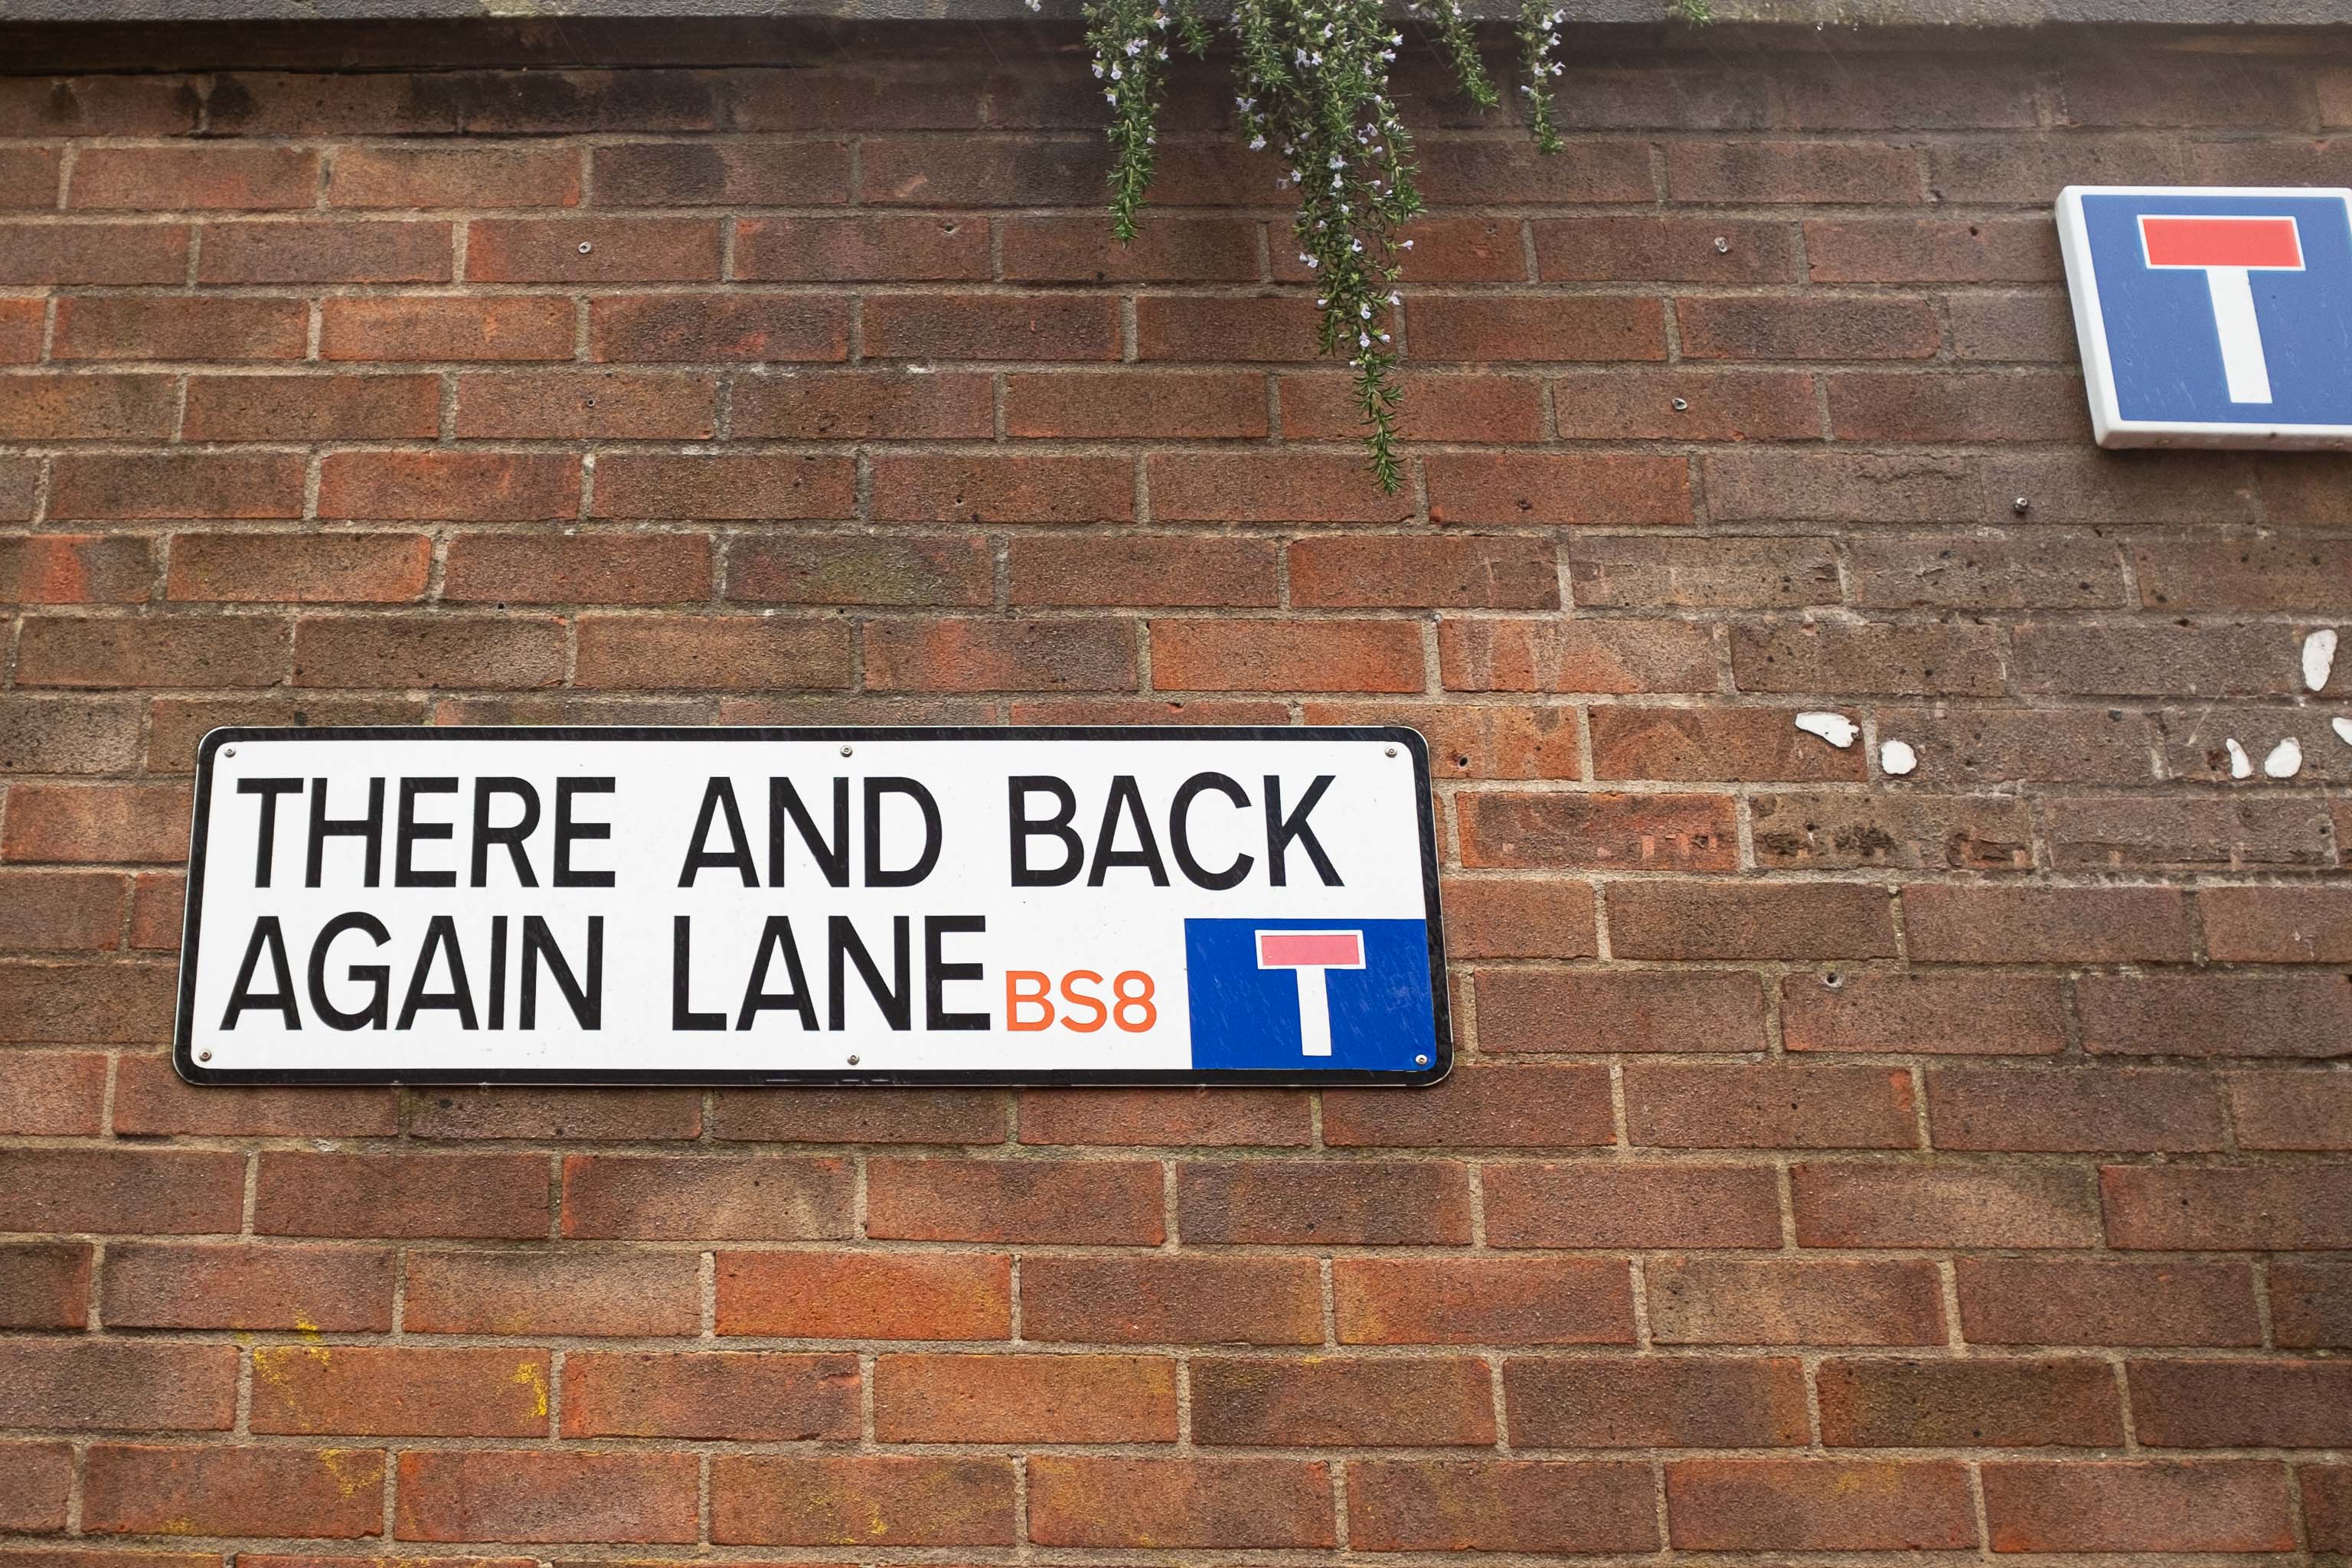 There and Back Again Lane
One of the best street names in Bristol. The street itself isn't up to much, mind.
